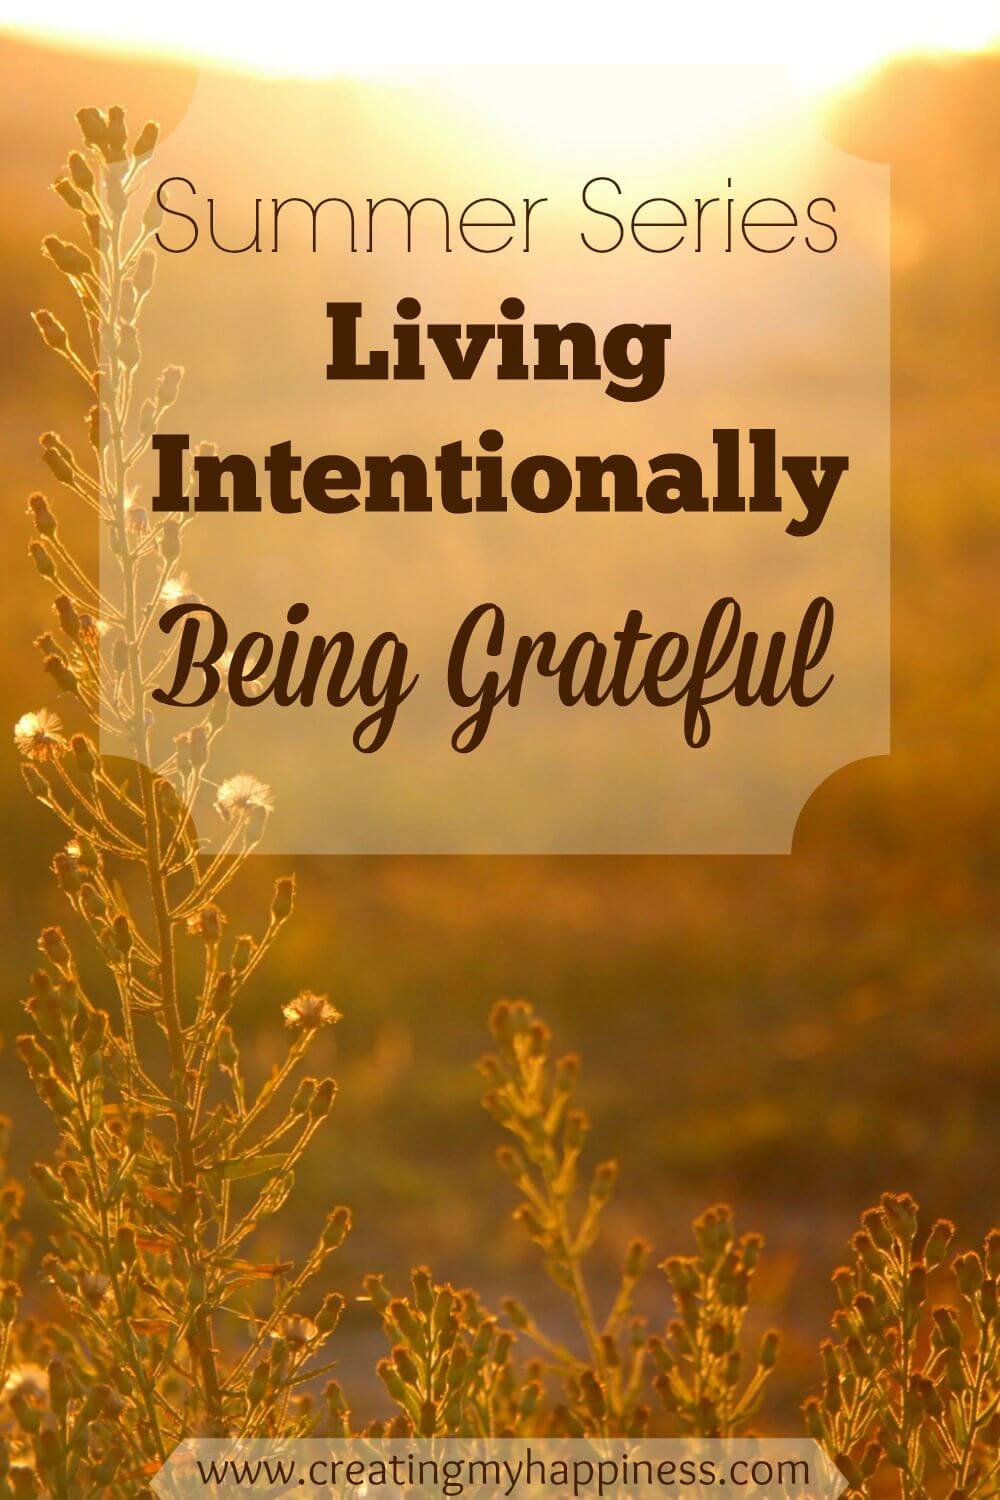 Being grateful is the key to an intentional life. Only when we notice all the blessings around us will we stop searching for them elsewhere.